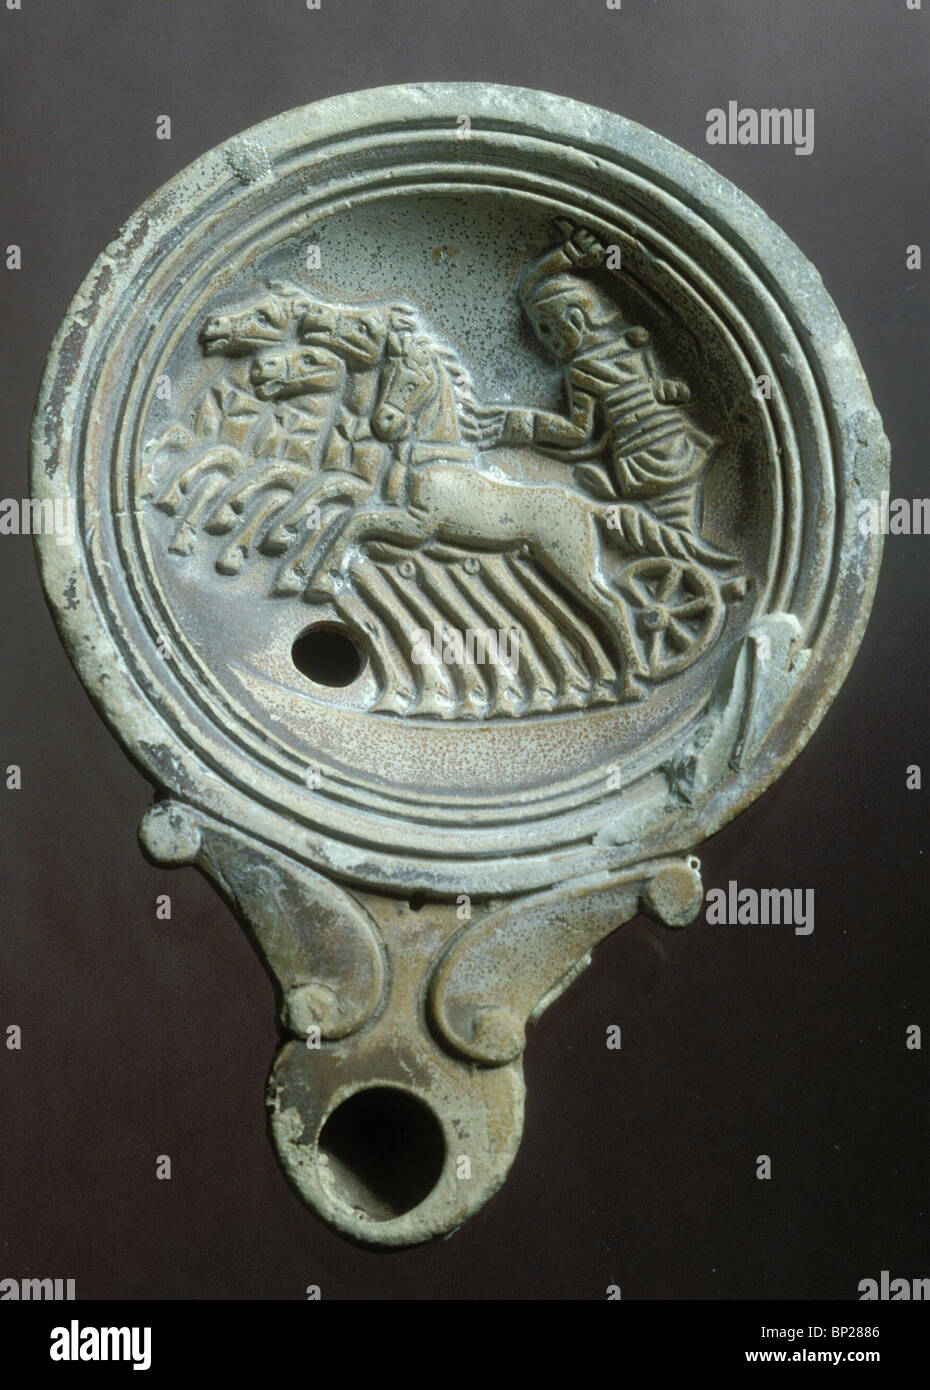 1937. DECORATED ROMAN PERIOD OIL-LAMP DEPICTING A RACING CARRIAGE WITH FOUR HORSES Stock Photo